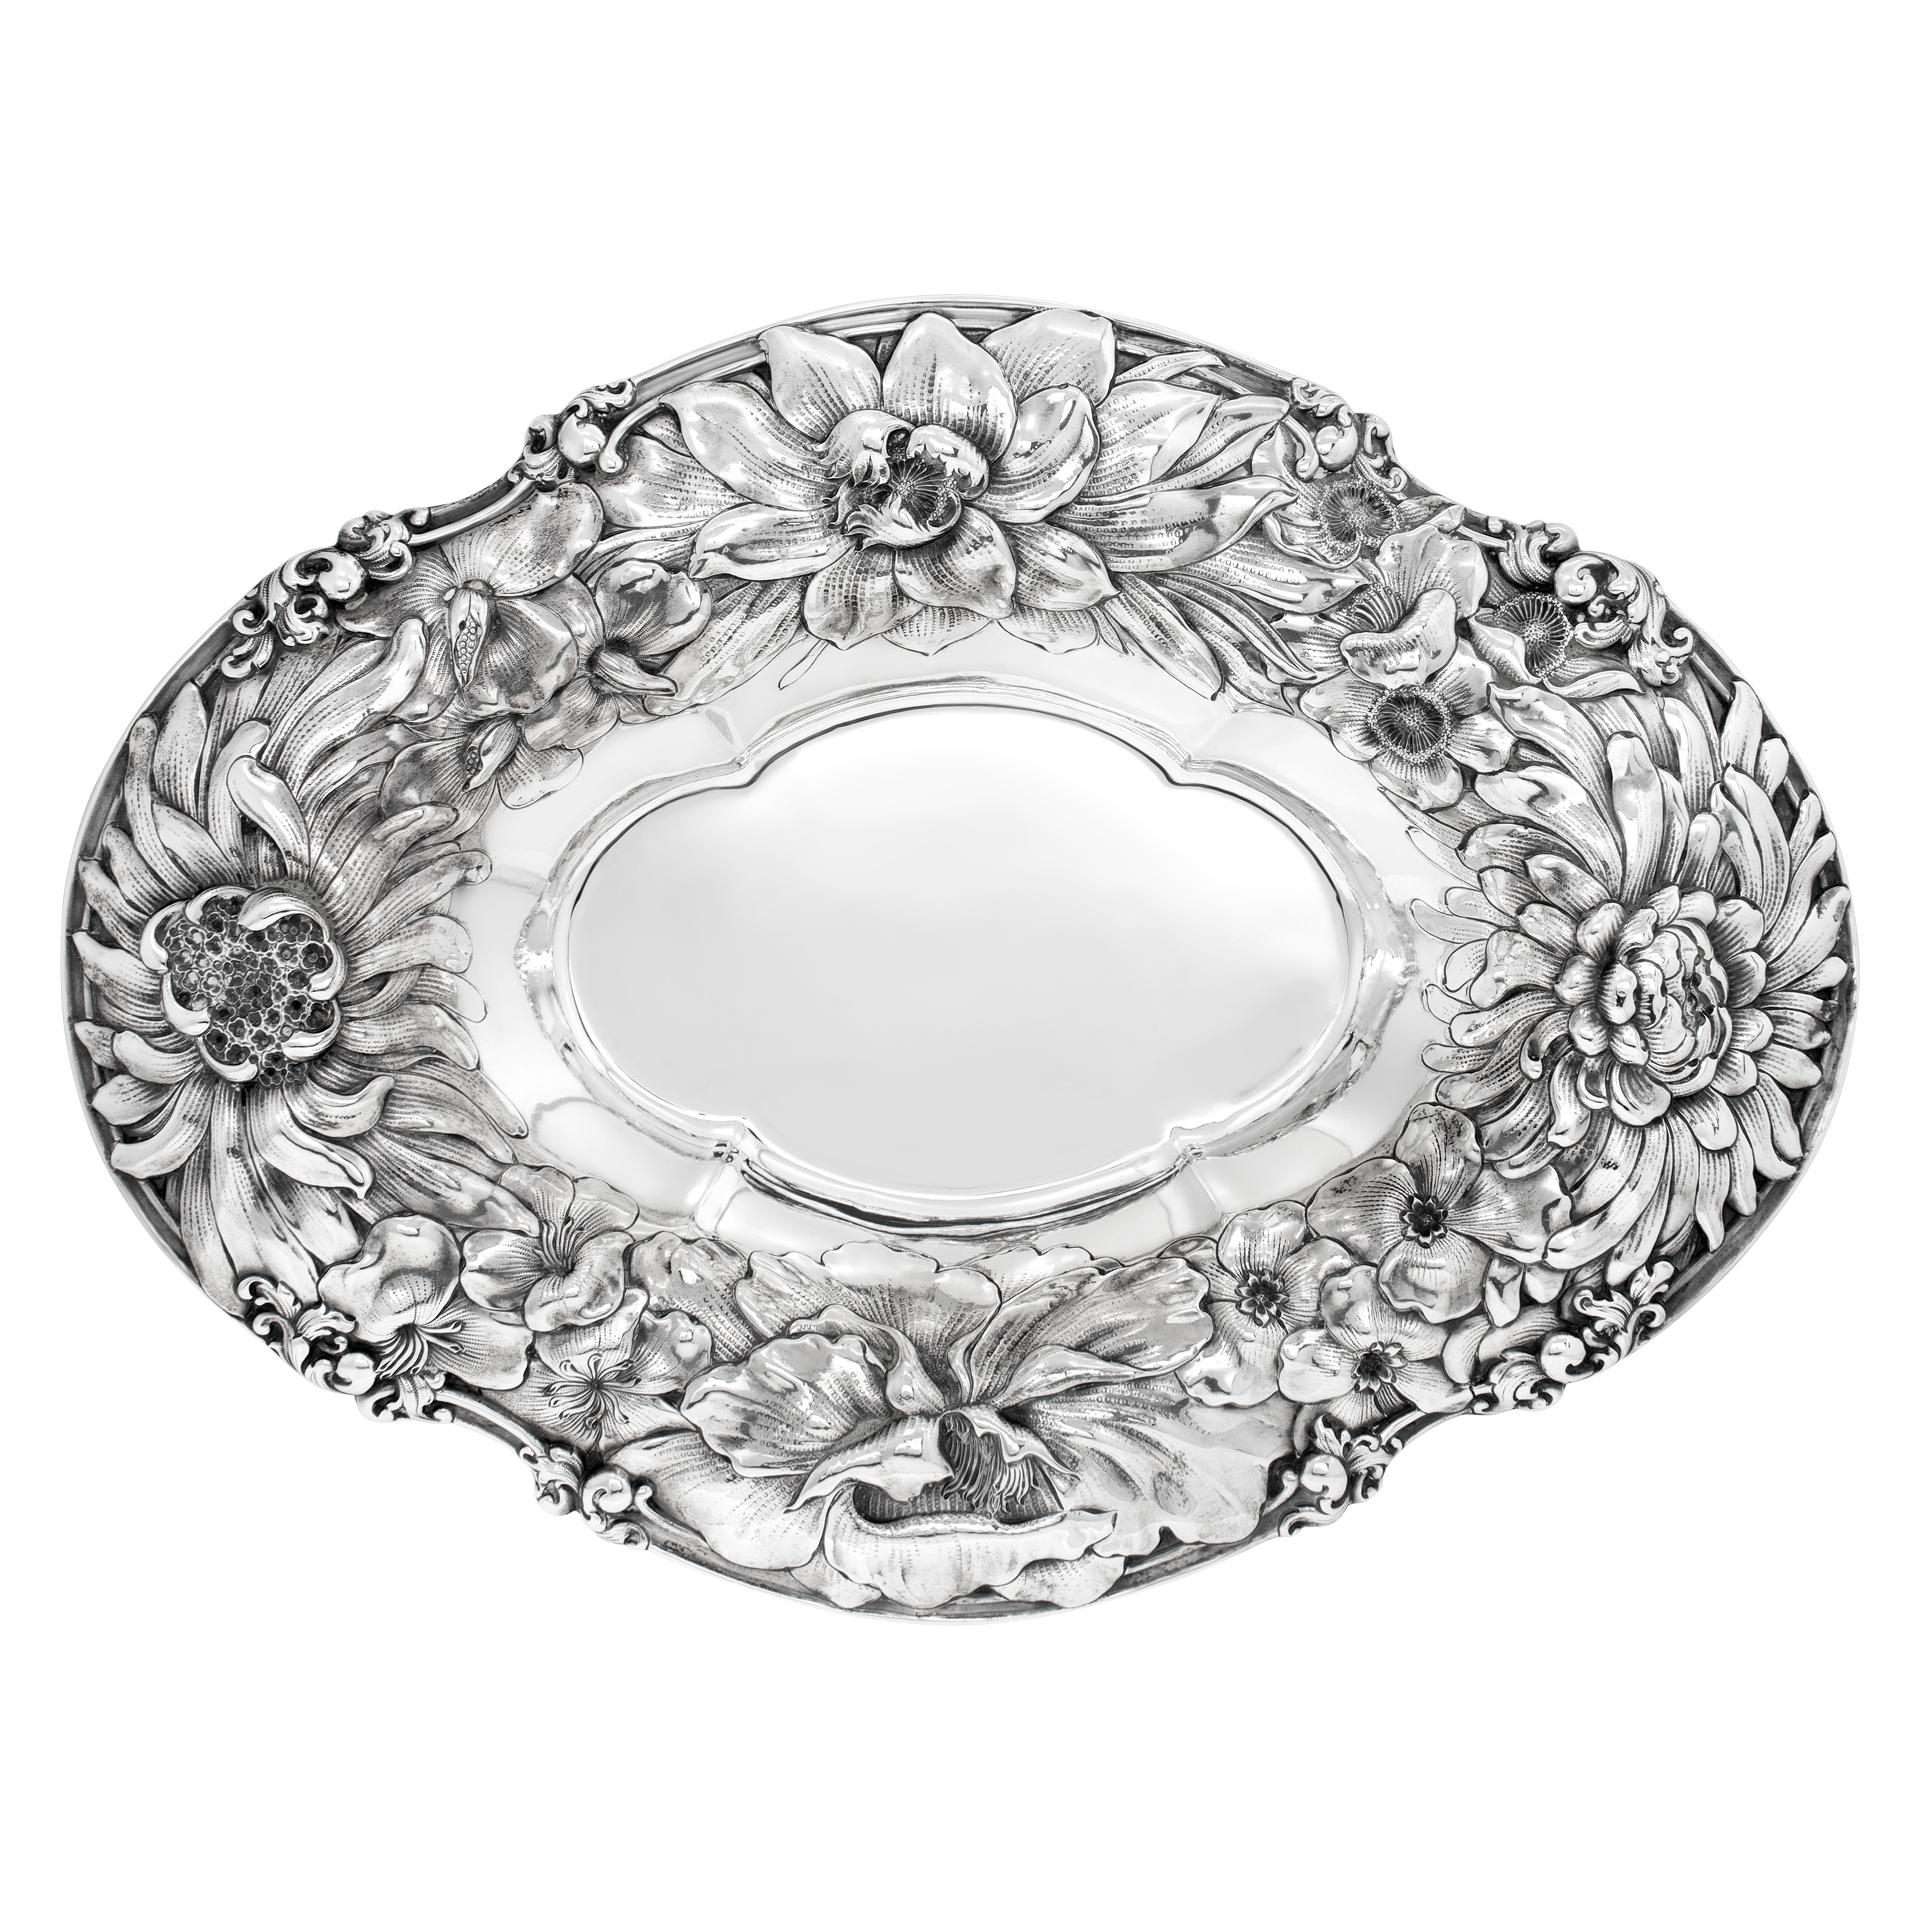 Antique IMPERIAL CHRYSANTHEMUM sterling silver oval bowl centerpiece, patented in 1894 by Gorham. Measurements: 15